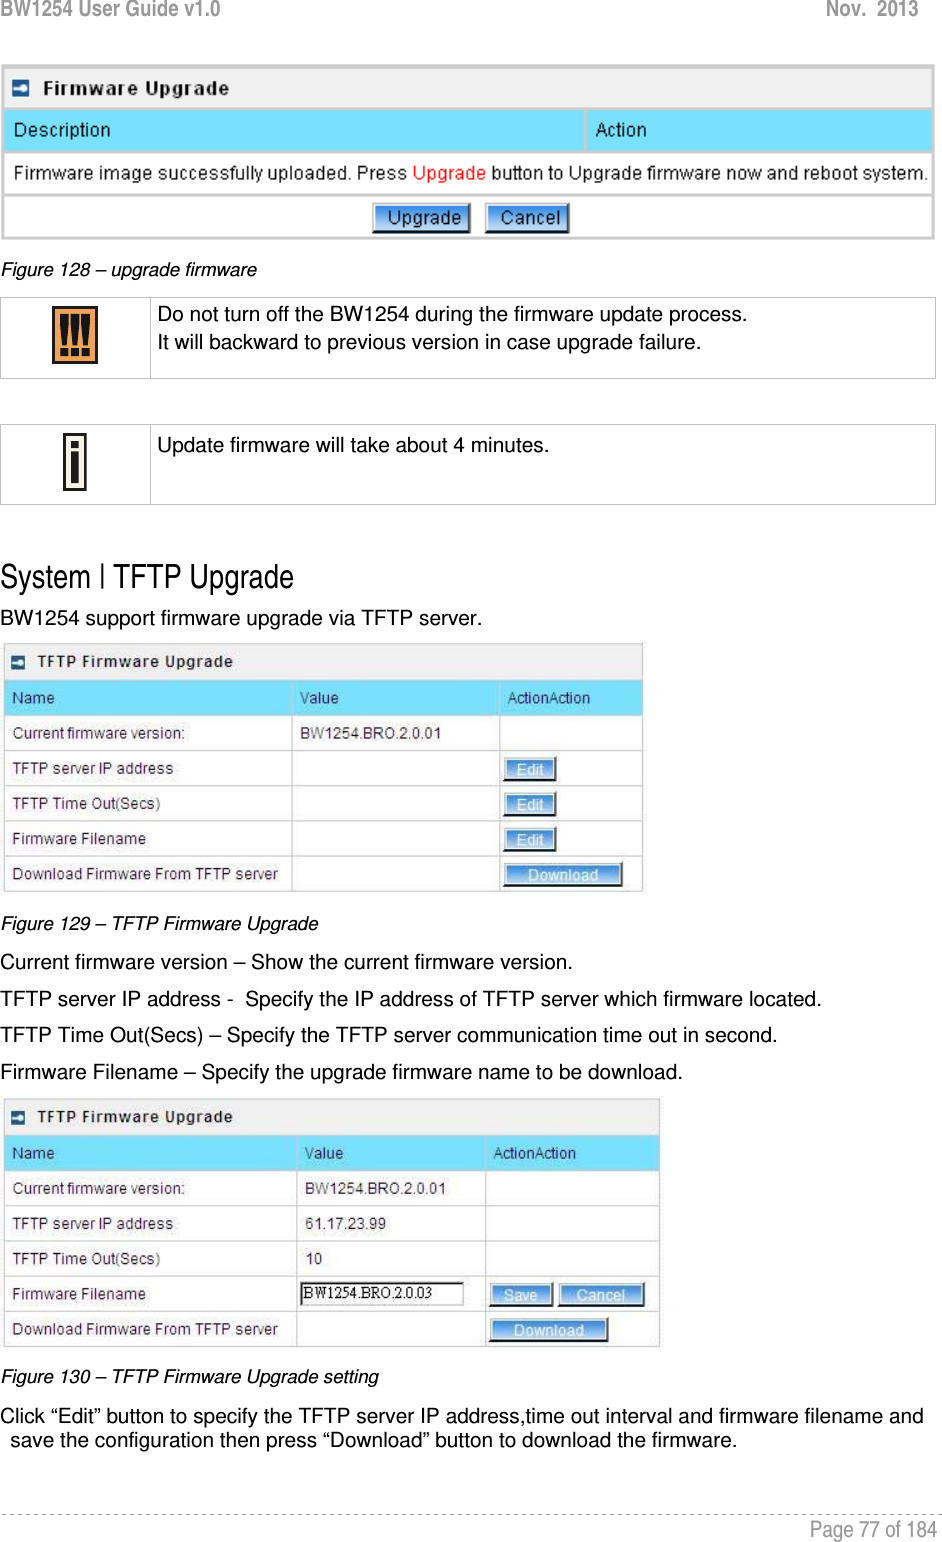 BW1254 User Guide v1.0  Nov.  2013     Page 77 of 184    Figure 128 – upgrade firmware  Do not turn off the BW1254 during the firmware update process.  It will backward to previous version in case upgrade failure.   Update firmware will take about 4 minutes.   System | TFTP Upgrade BW1254 support firmware upgrade via TFTP server.  Figure 129 – TFTP Firmware Upgrade Current firmware version – Show the current firmware version. TFTP server IP address -  Specify the IP address of TFTP server which firmware located. TFTP Time Out(Secs) – Specify the TFTP server communication time out in second. Firmware Filename – Specify the upgrade firmware name to be download.  Figure 130 – TFTP Firmware Upgrade setting Click “Edit” button to specify the TFTP server IP address,time out interval and firmware filename and save the configuration then press “Download” button to download the firmware. 